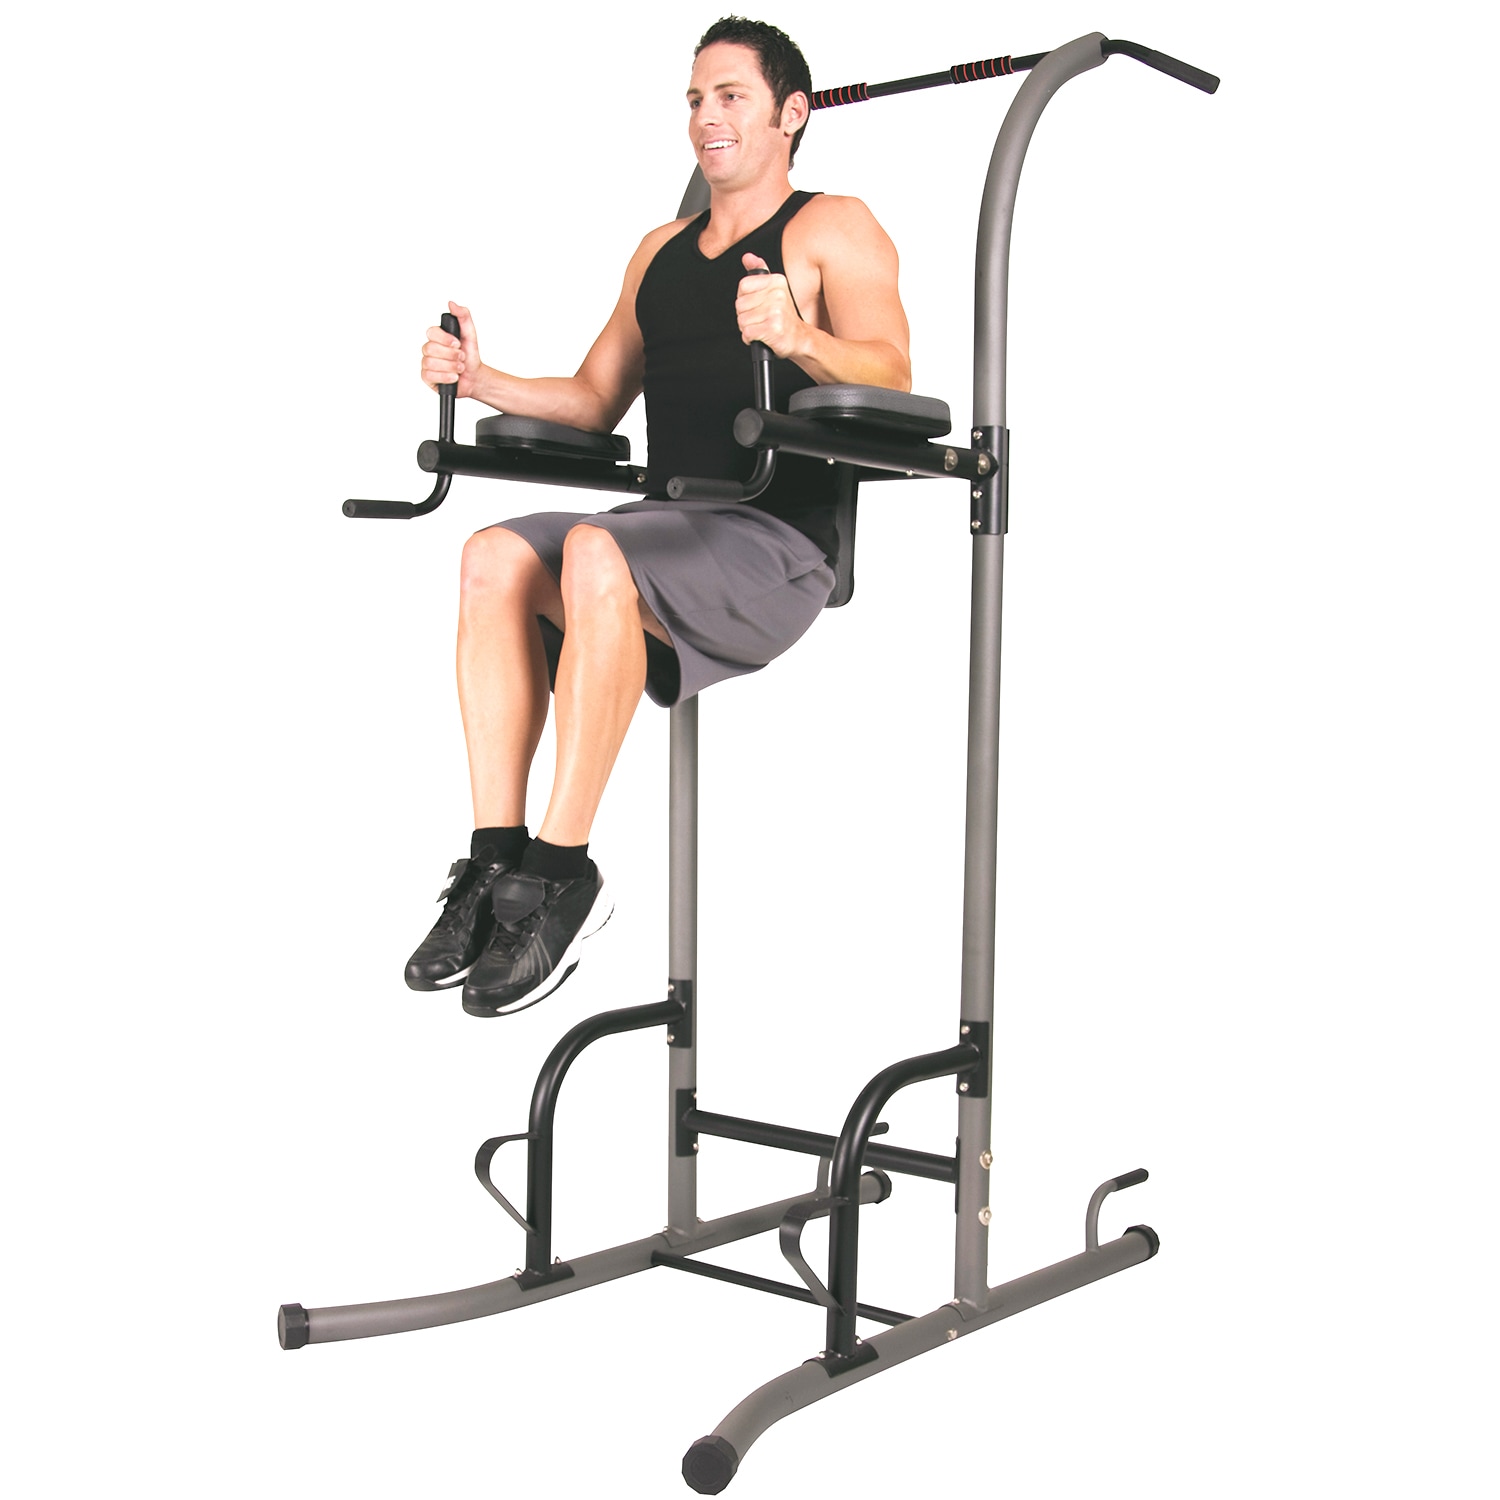 Body Flex Sports Body Champ Fitness Multi Function Power Tower - Grey, 5  Workout Stations, Adjustable Dip Handles, Multiple Grips in Gray